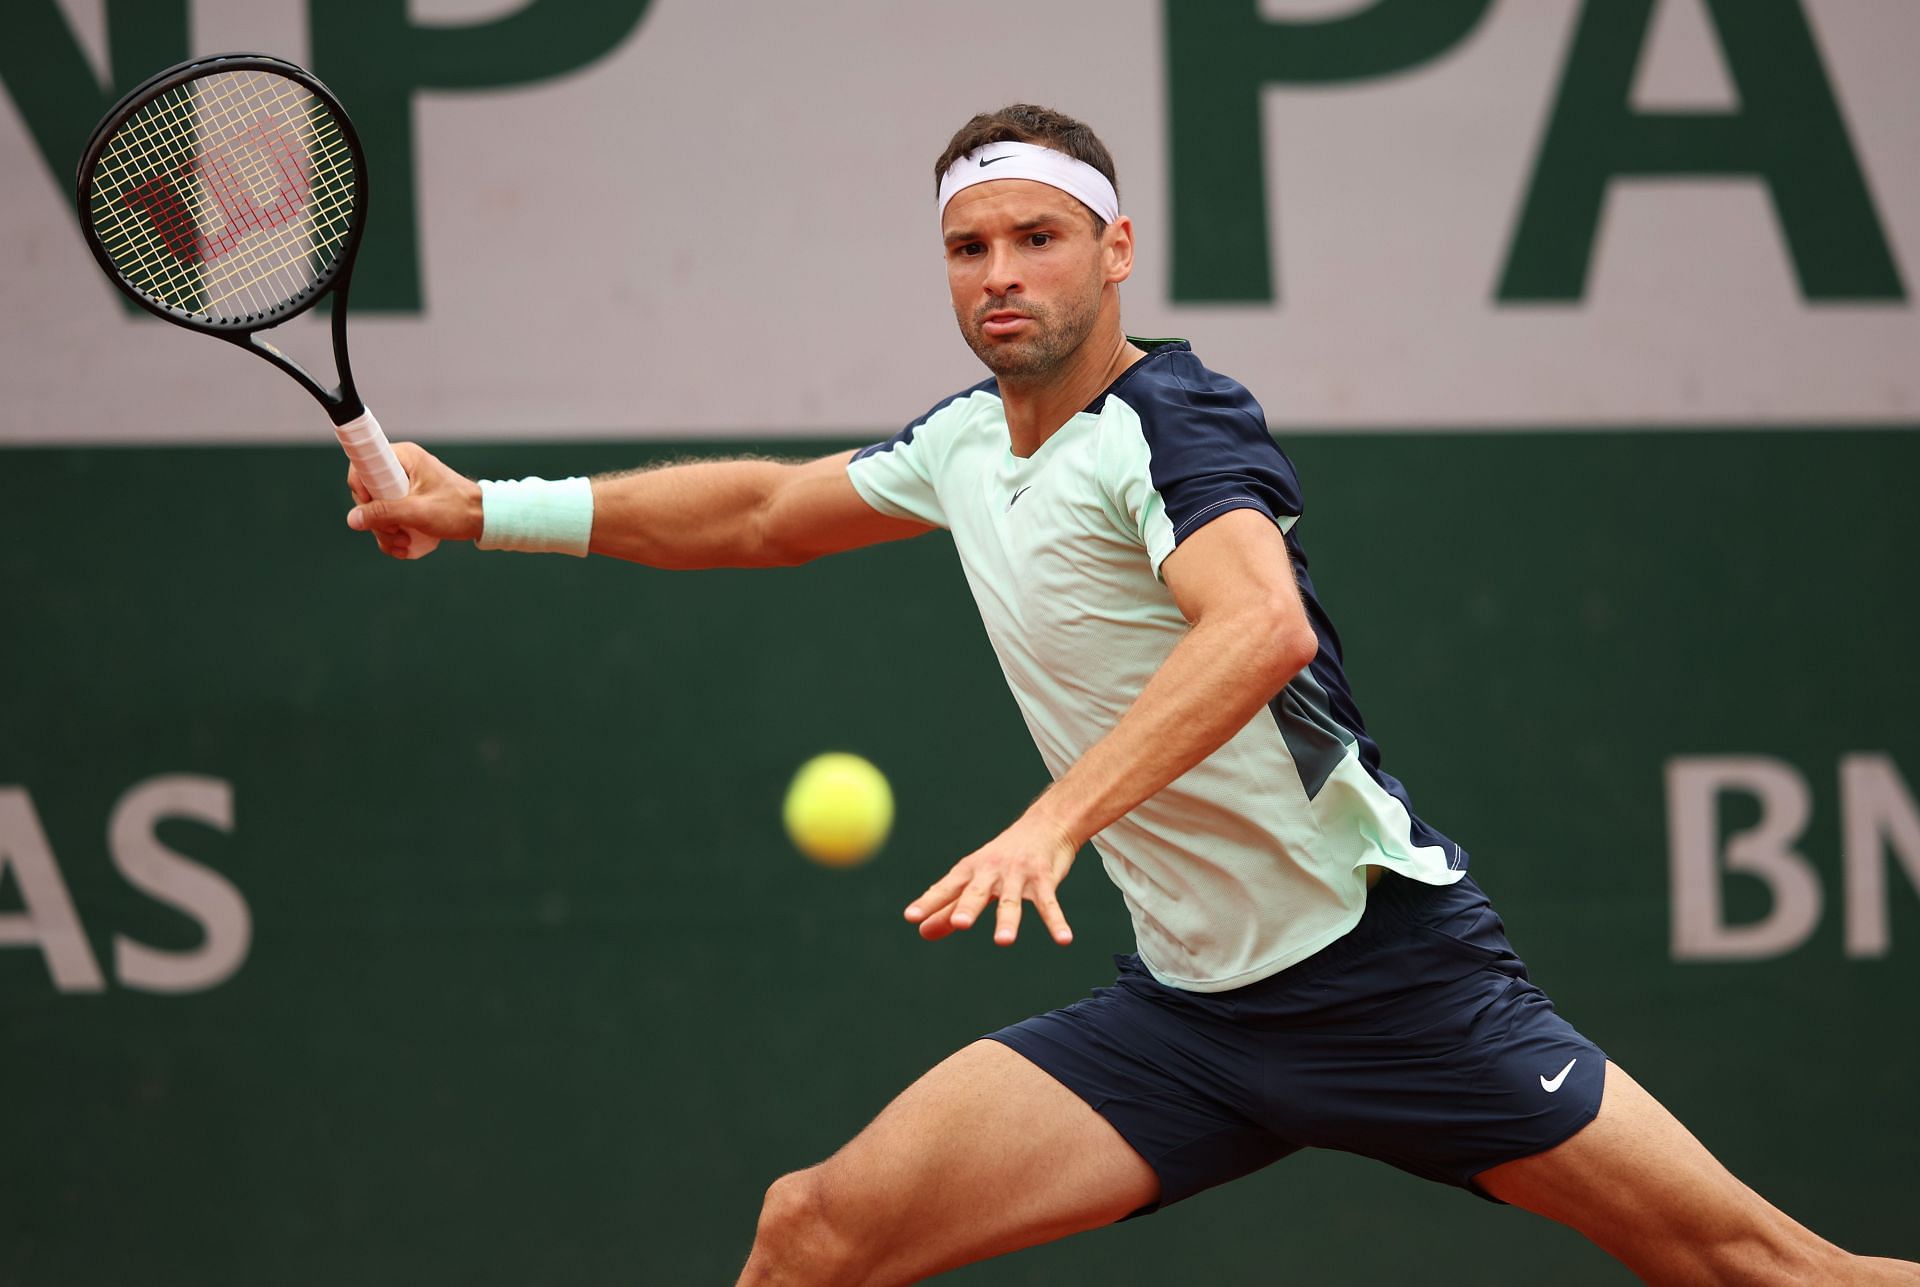 Grigor Dimitrov at the 2022 French Open.